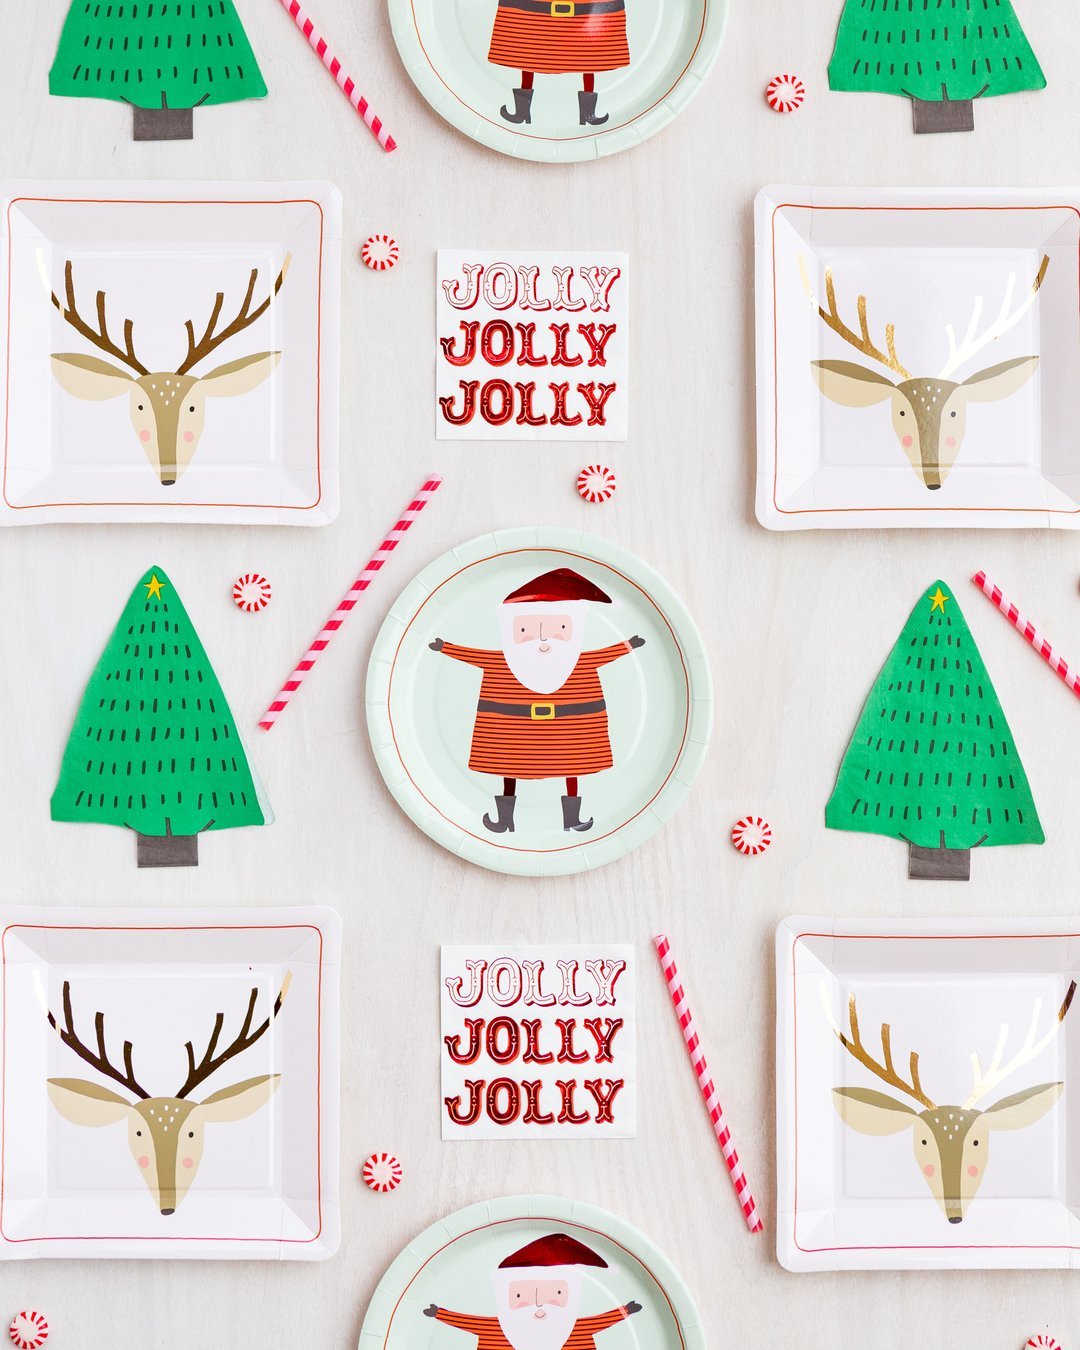 Jolly holiday napkins set amongst other party supplies such as Santa and reindeer plates